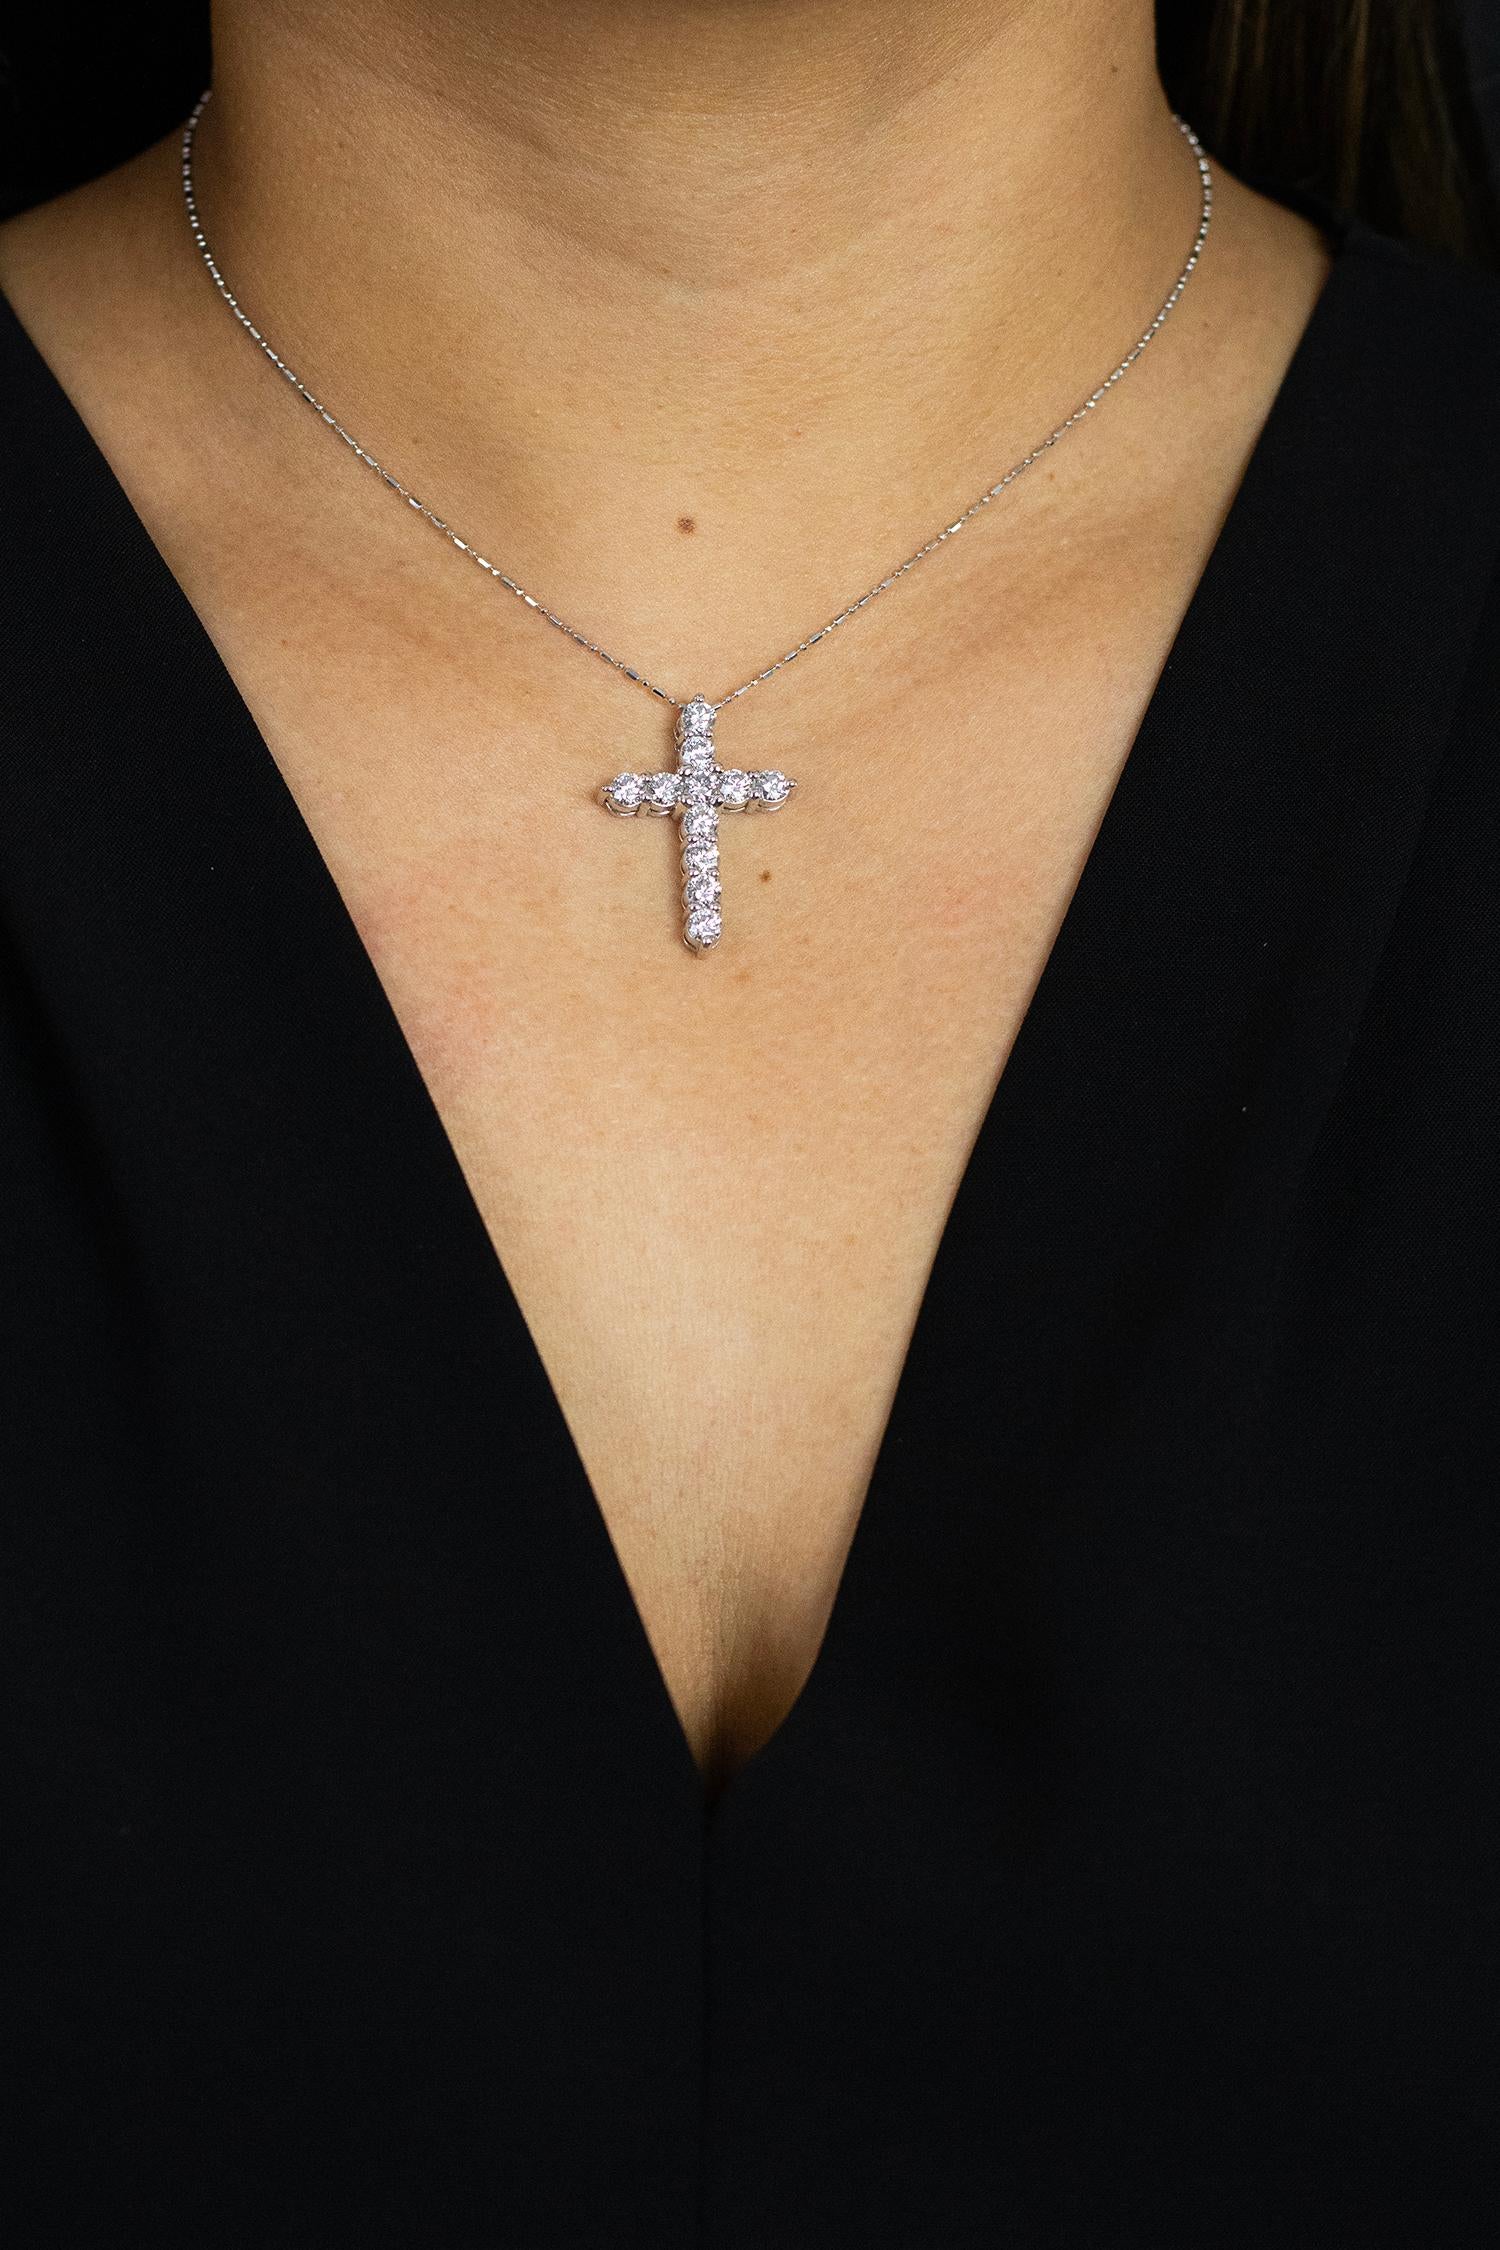 A classic cross design set with 2.24 carats total of round brilliant diamonds. Diamonds  quality are G color, VS clarity; and suspended in a 14k white gold mounting and chain. 16 inch chain length (adjustable upon request).

Roman Malakov is a